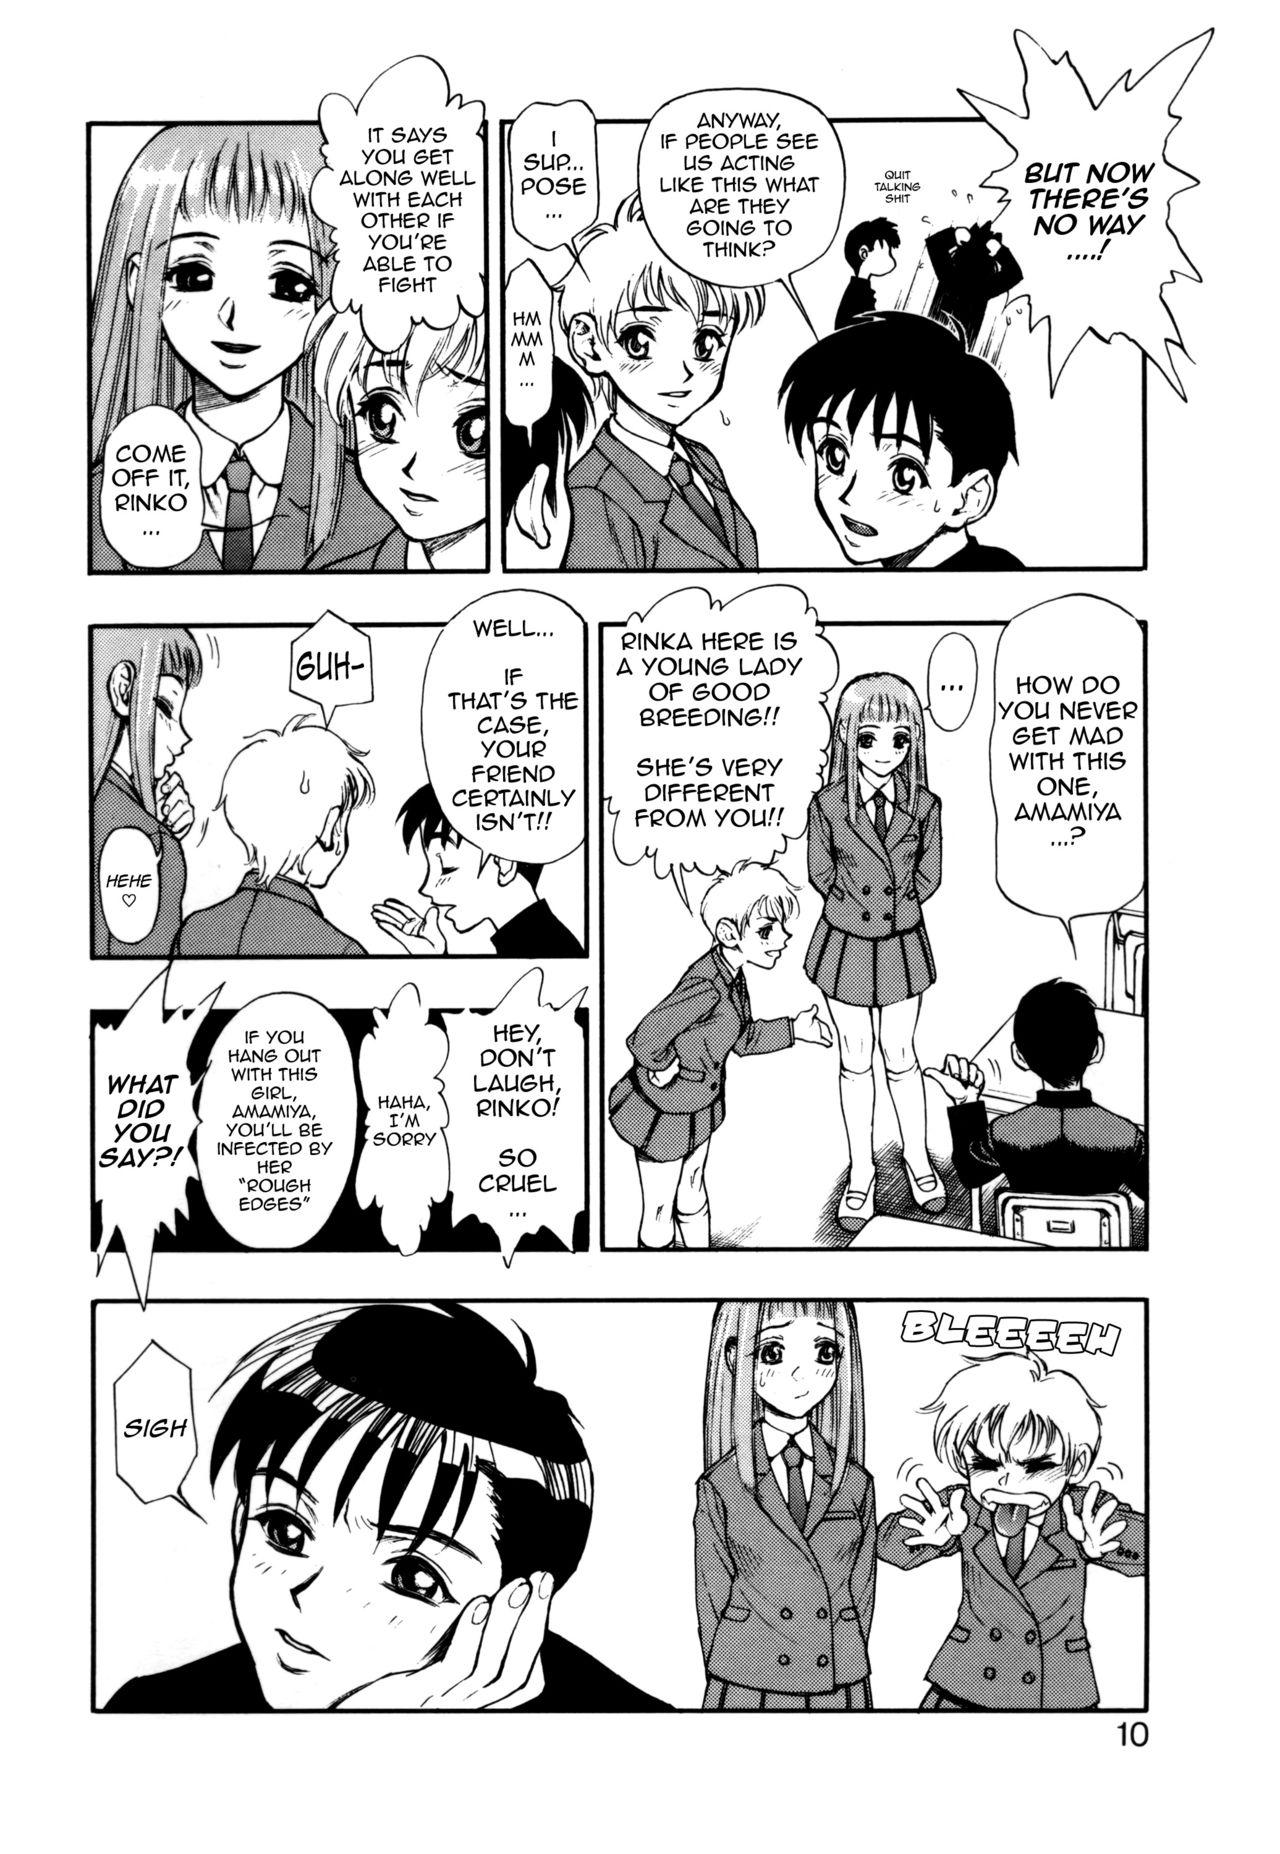 Amiga Zutto Zutto Suki Datta... | I've always loved you... Ch. 1-8 Eng Sub - Page 10